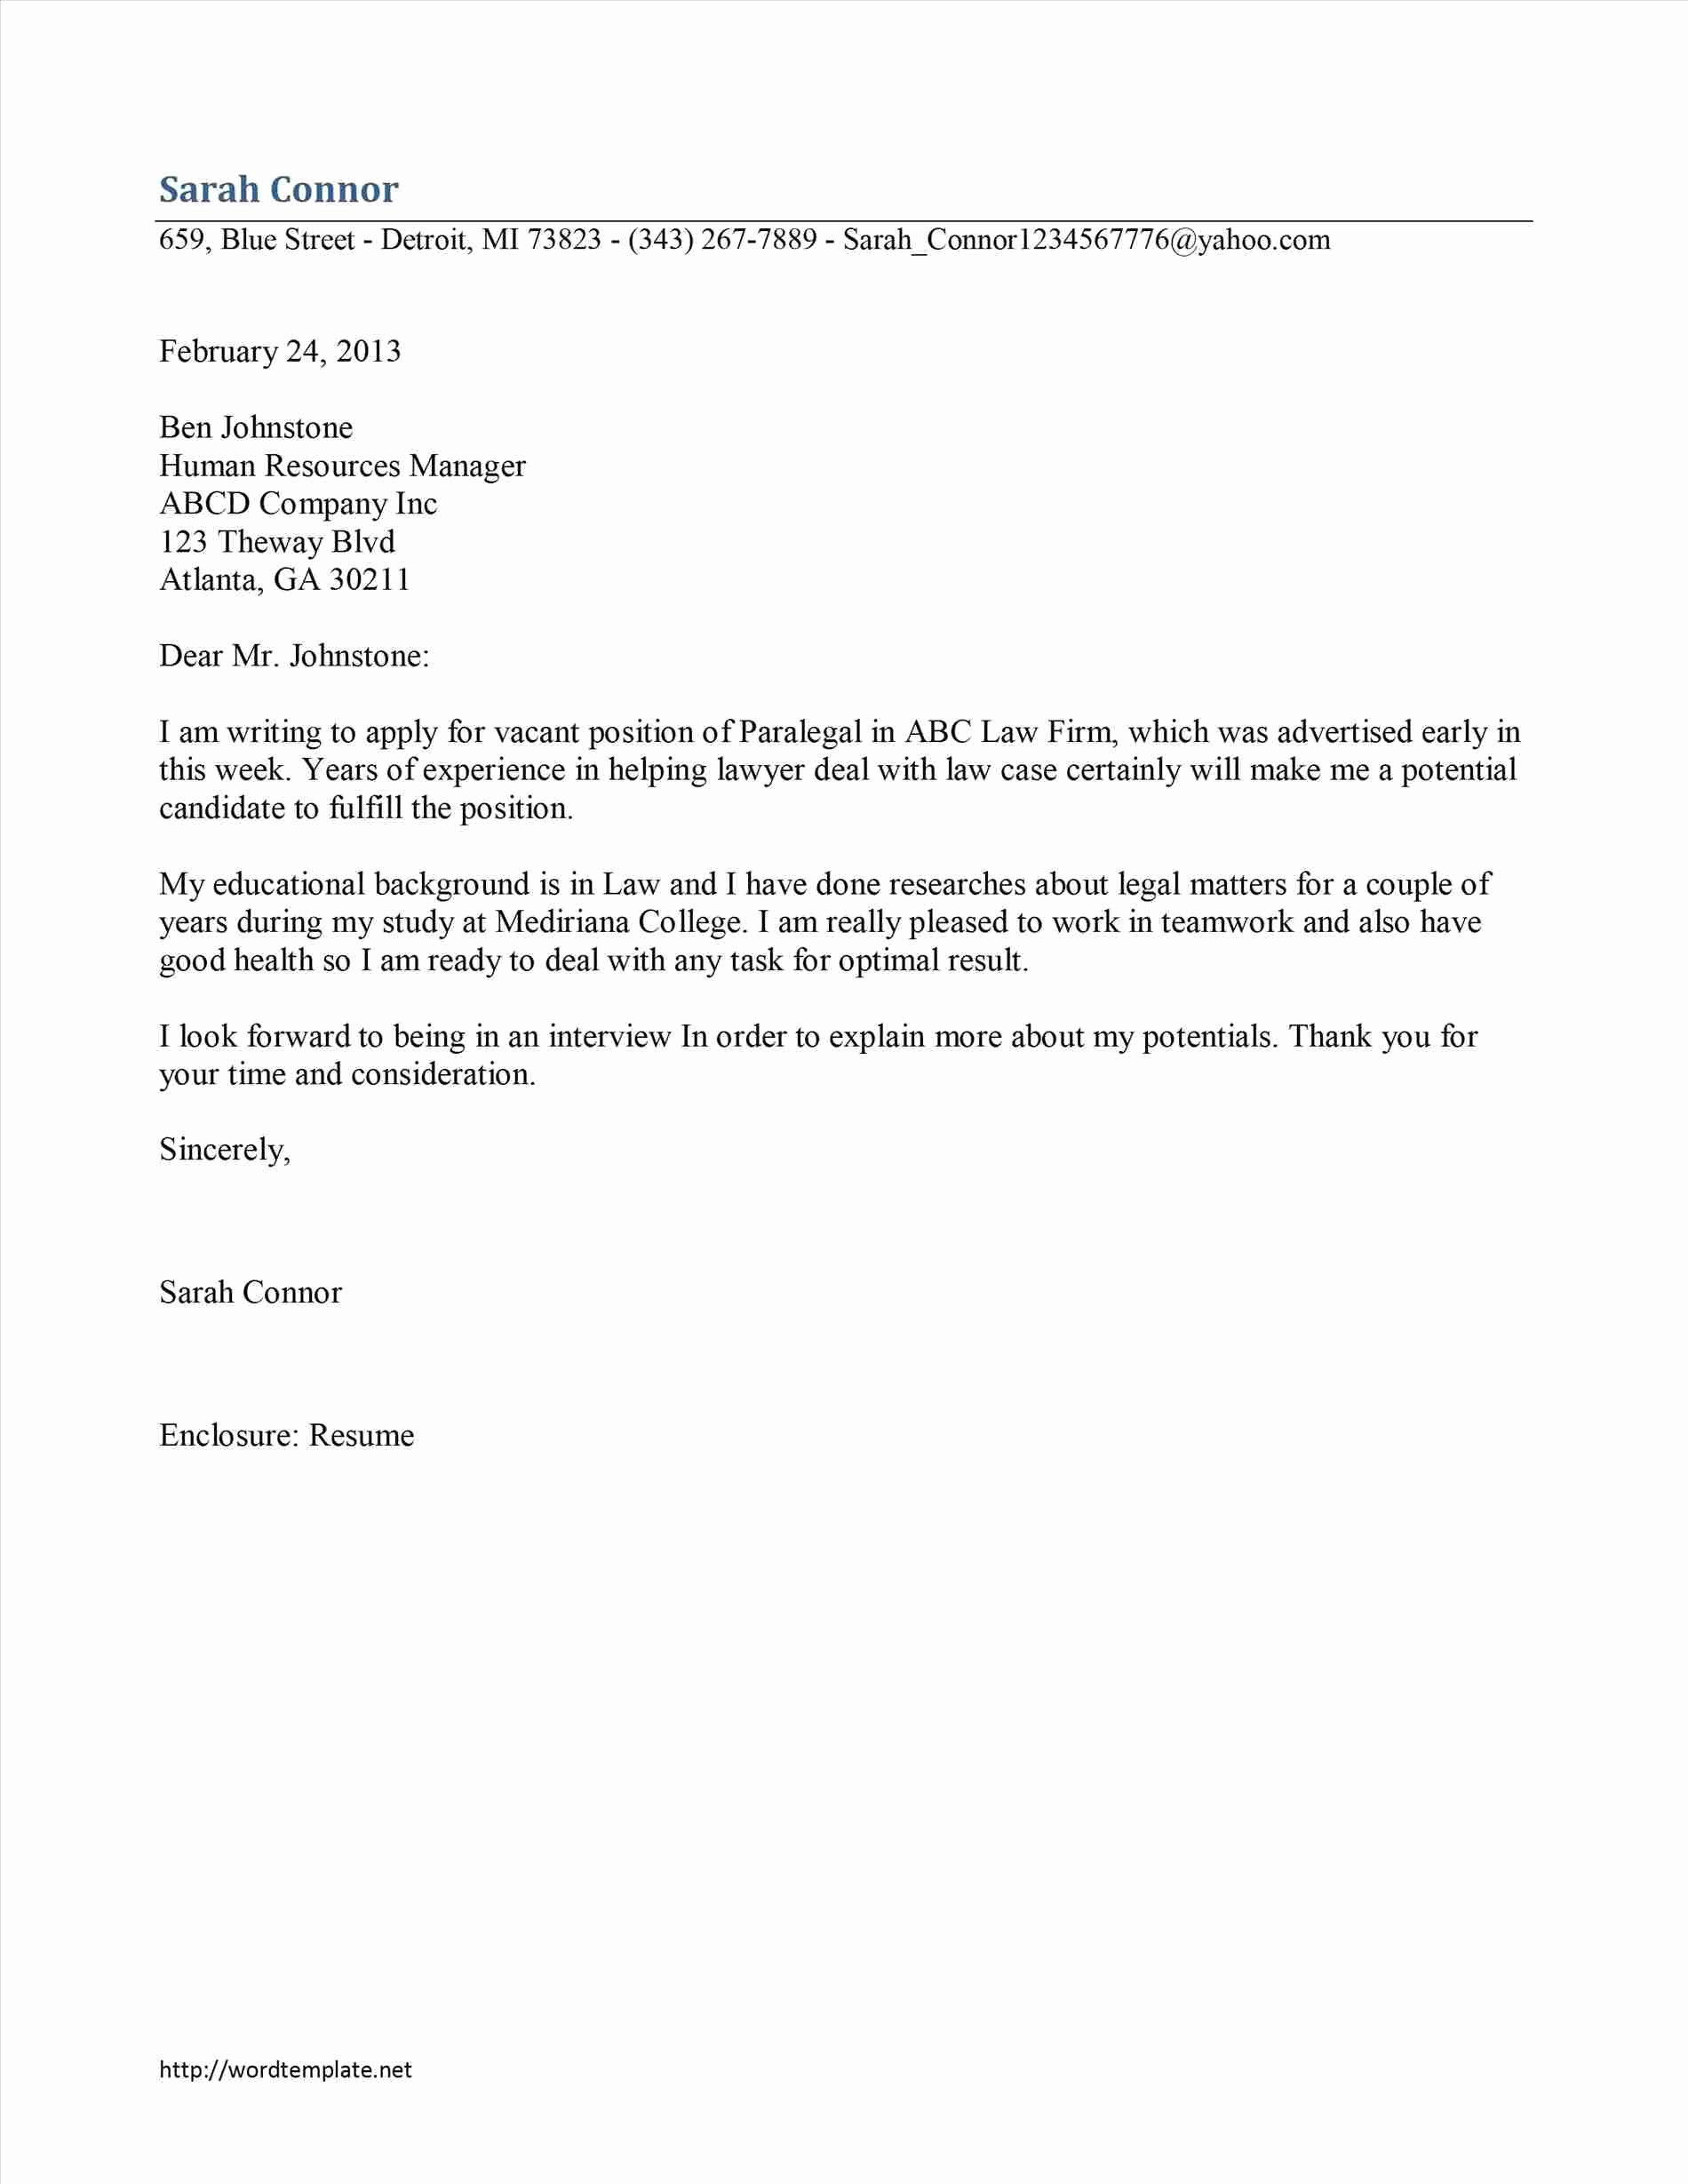 Paralegal Cover Letter Template - Awesome Cover Letter for School Secretary with No Experience